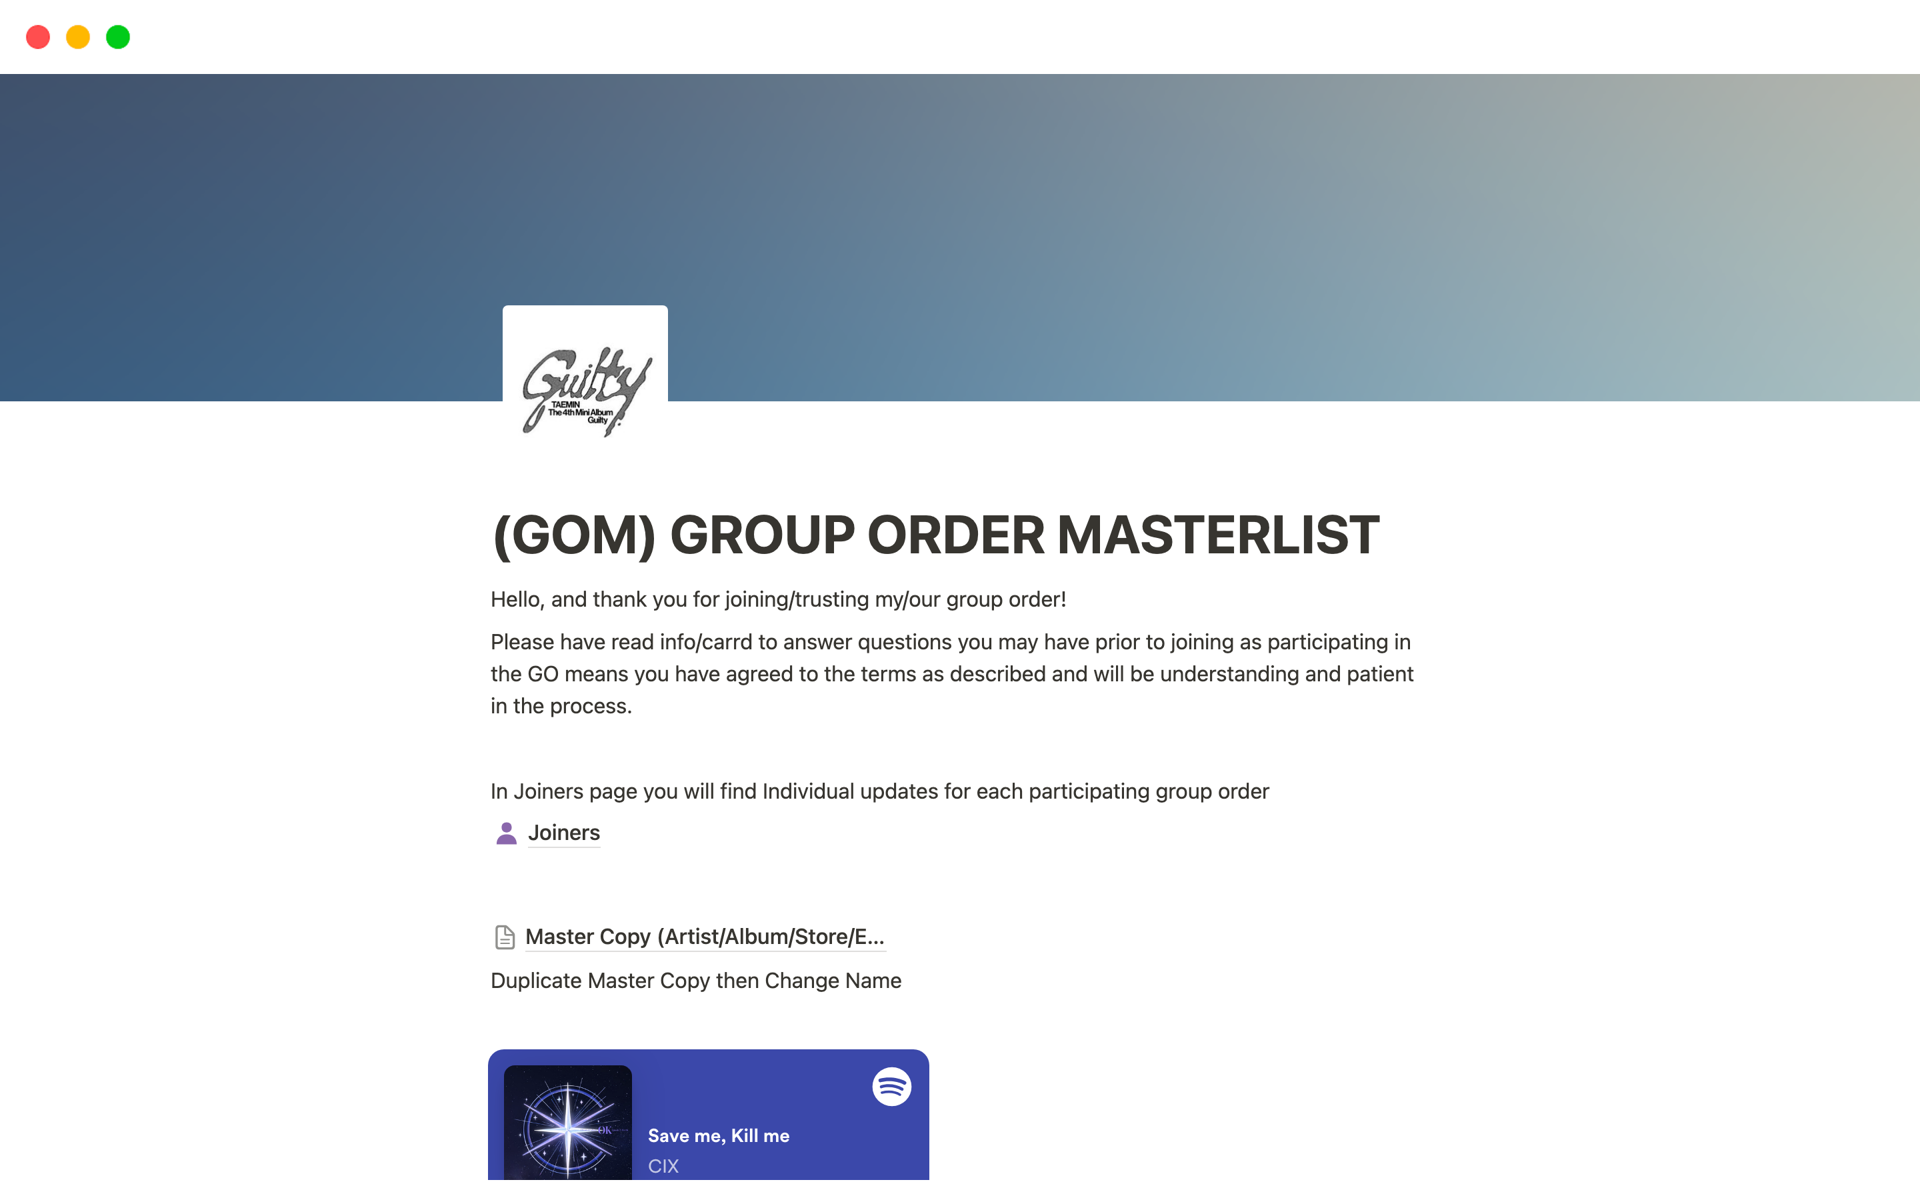 Allows GOM's to have a starting point for a Masterlist 